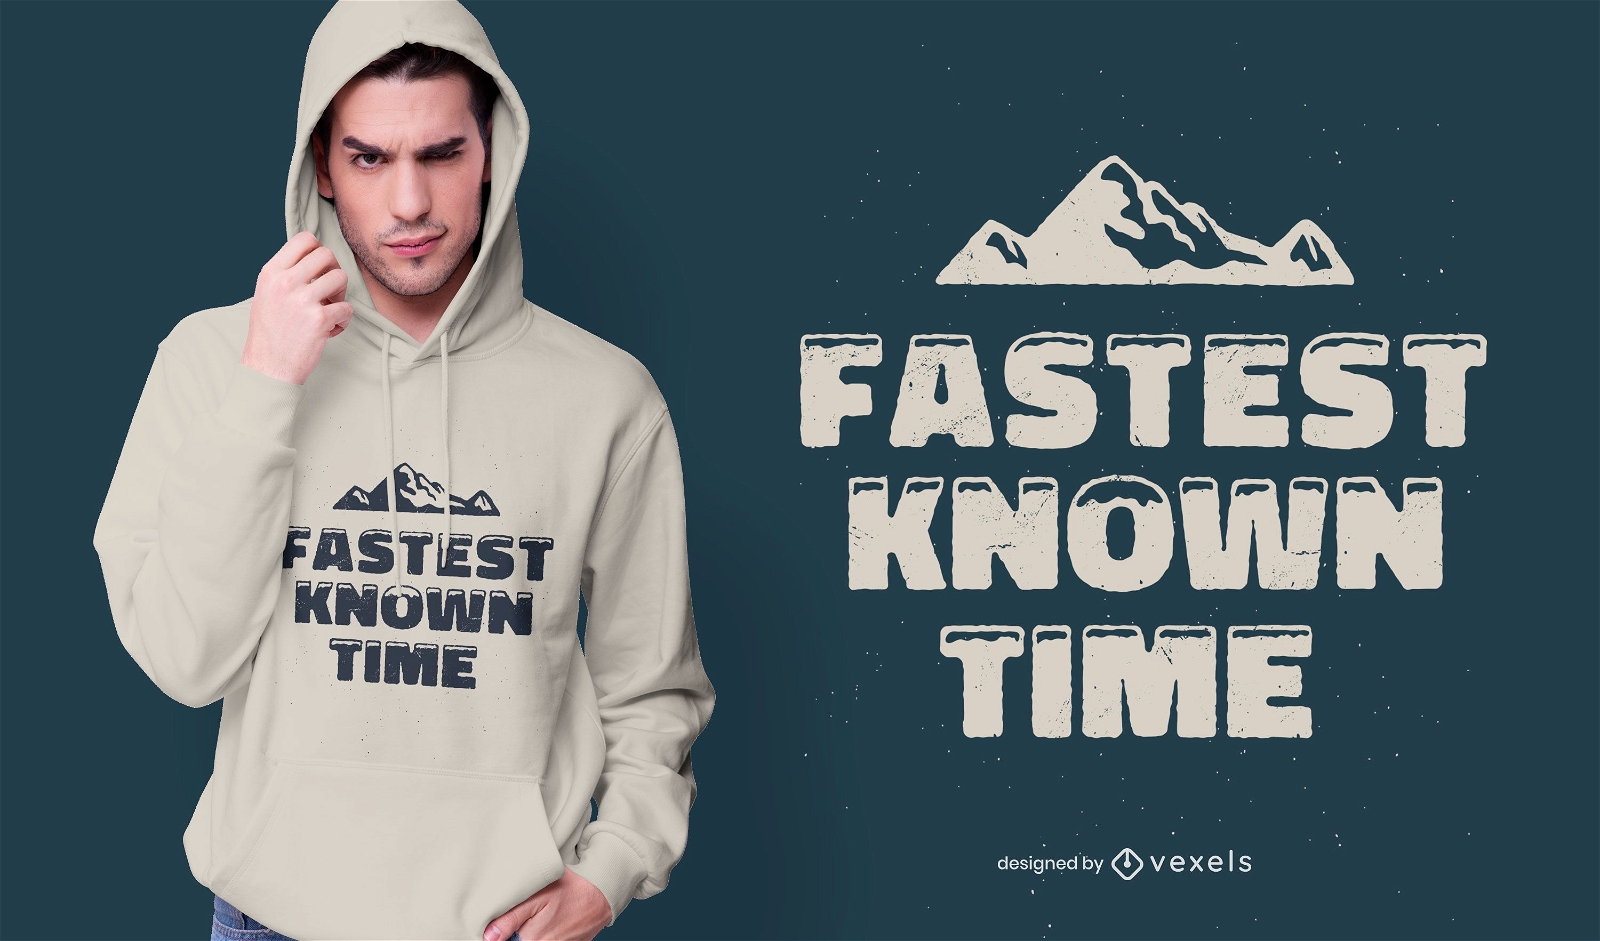 Fastest known time t-shirt design